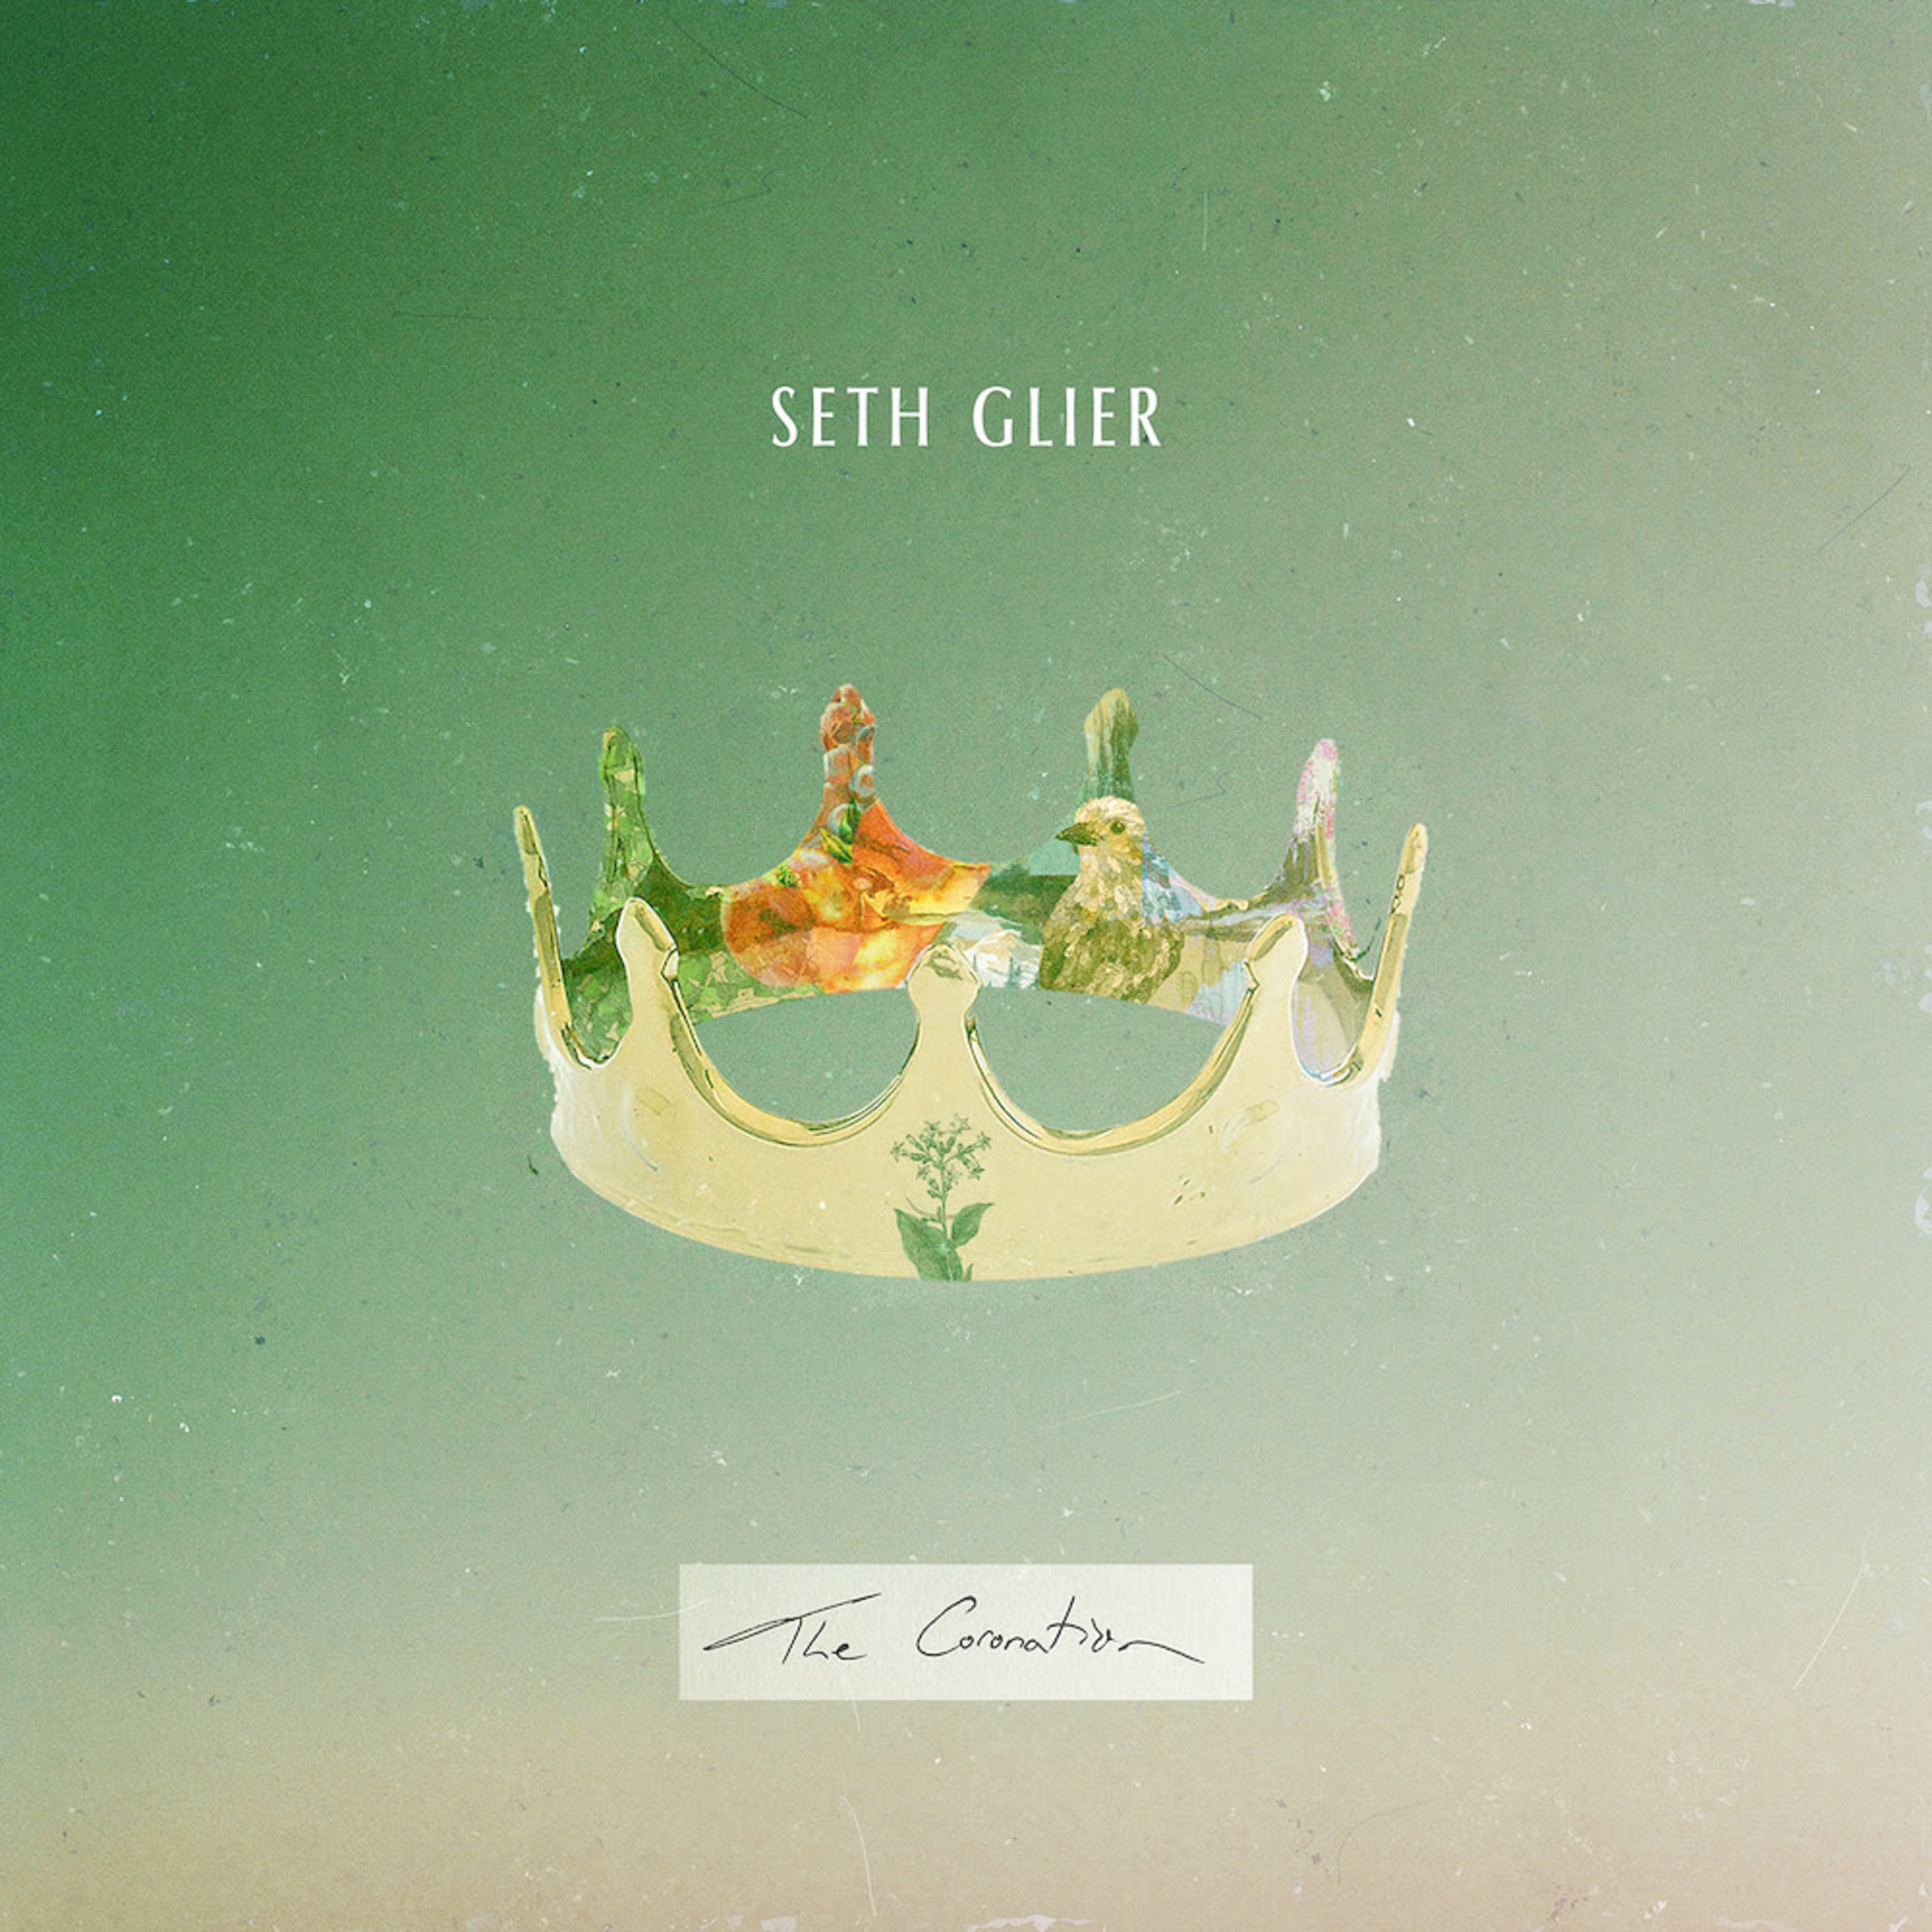 Seth Glier Releases New Cover Single "One Of Us" Featuring Raye Zaragoza